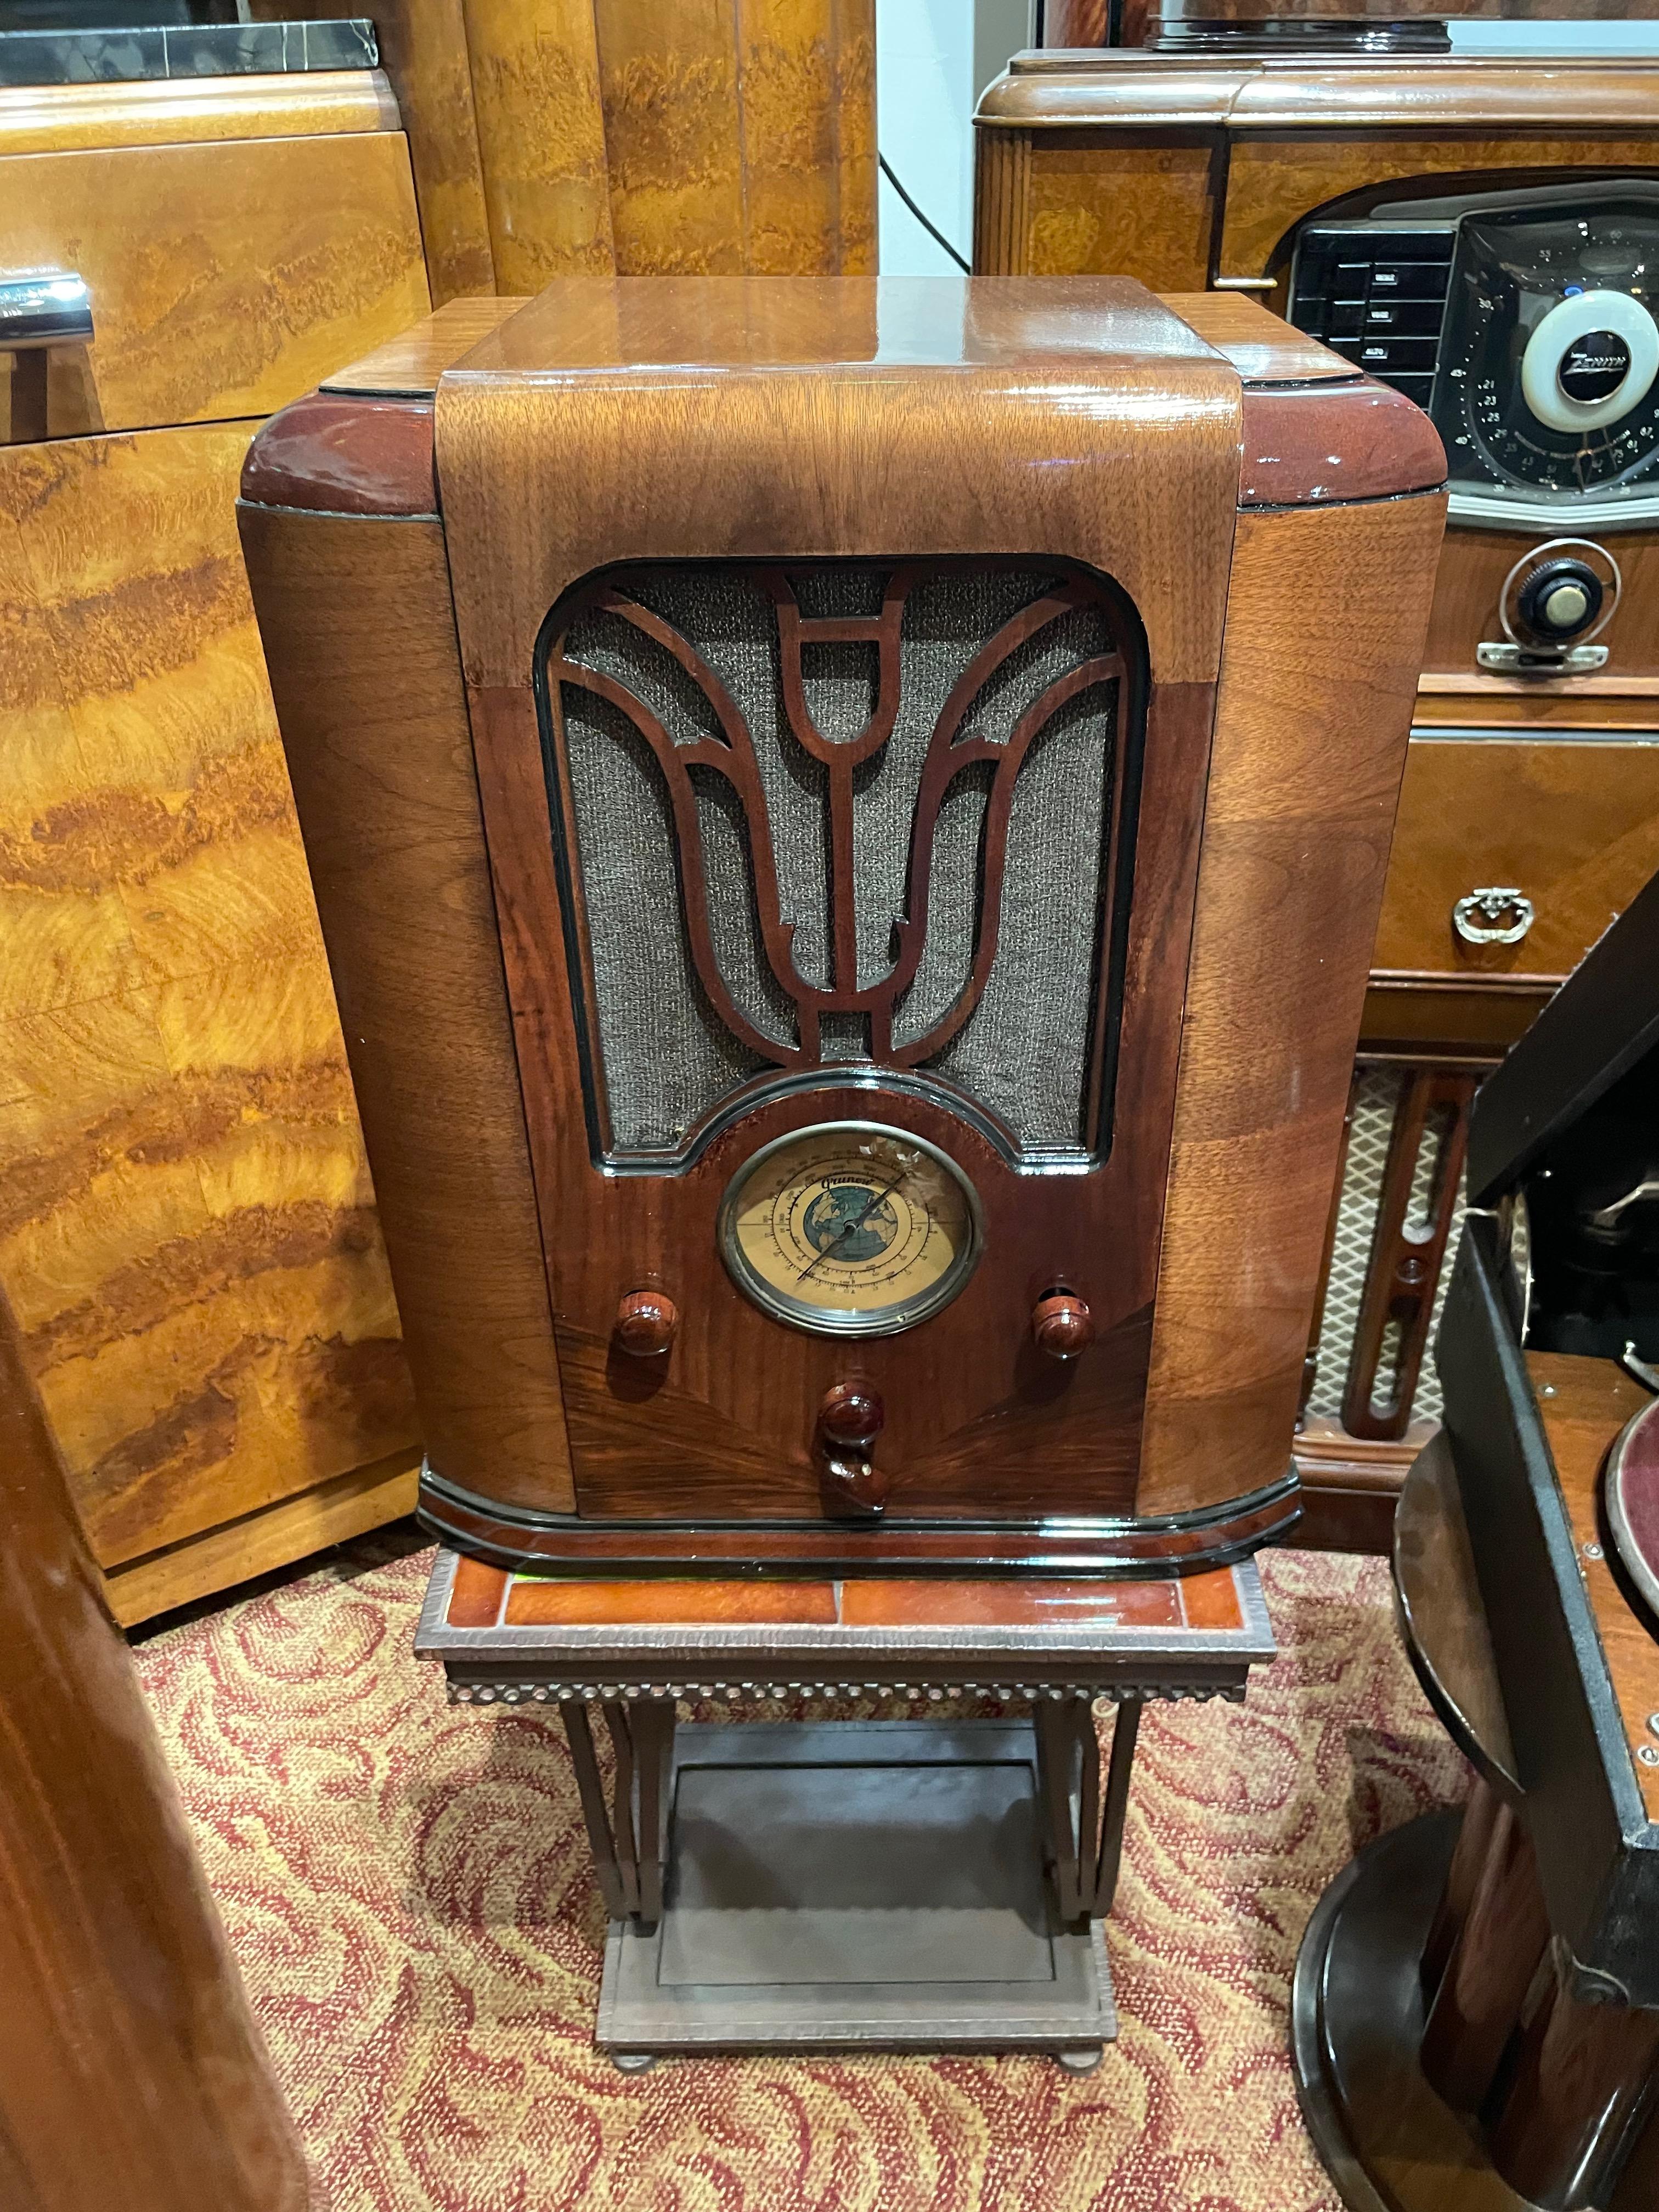 750 was Grunow’s top-of-the-line table radio in 1935. This large seven-tube, three-band (SB, SWx2) beauty sported twin gangs on the AM tuner for greater sensitivity and lots of volume through the original 8-inch Grunow speaker. Their cabinet work